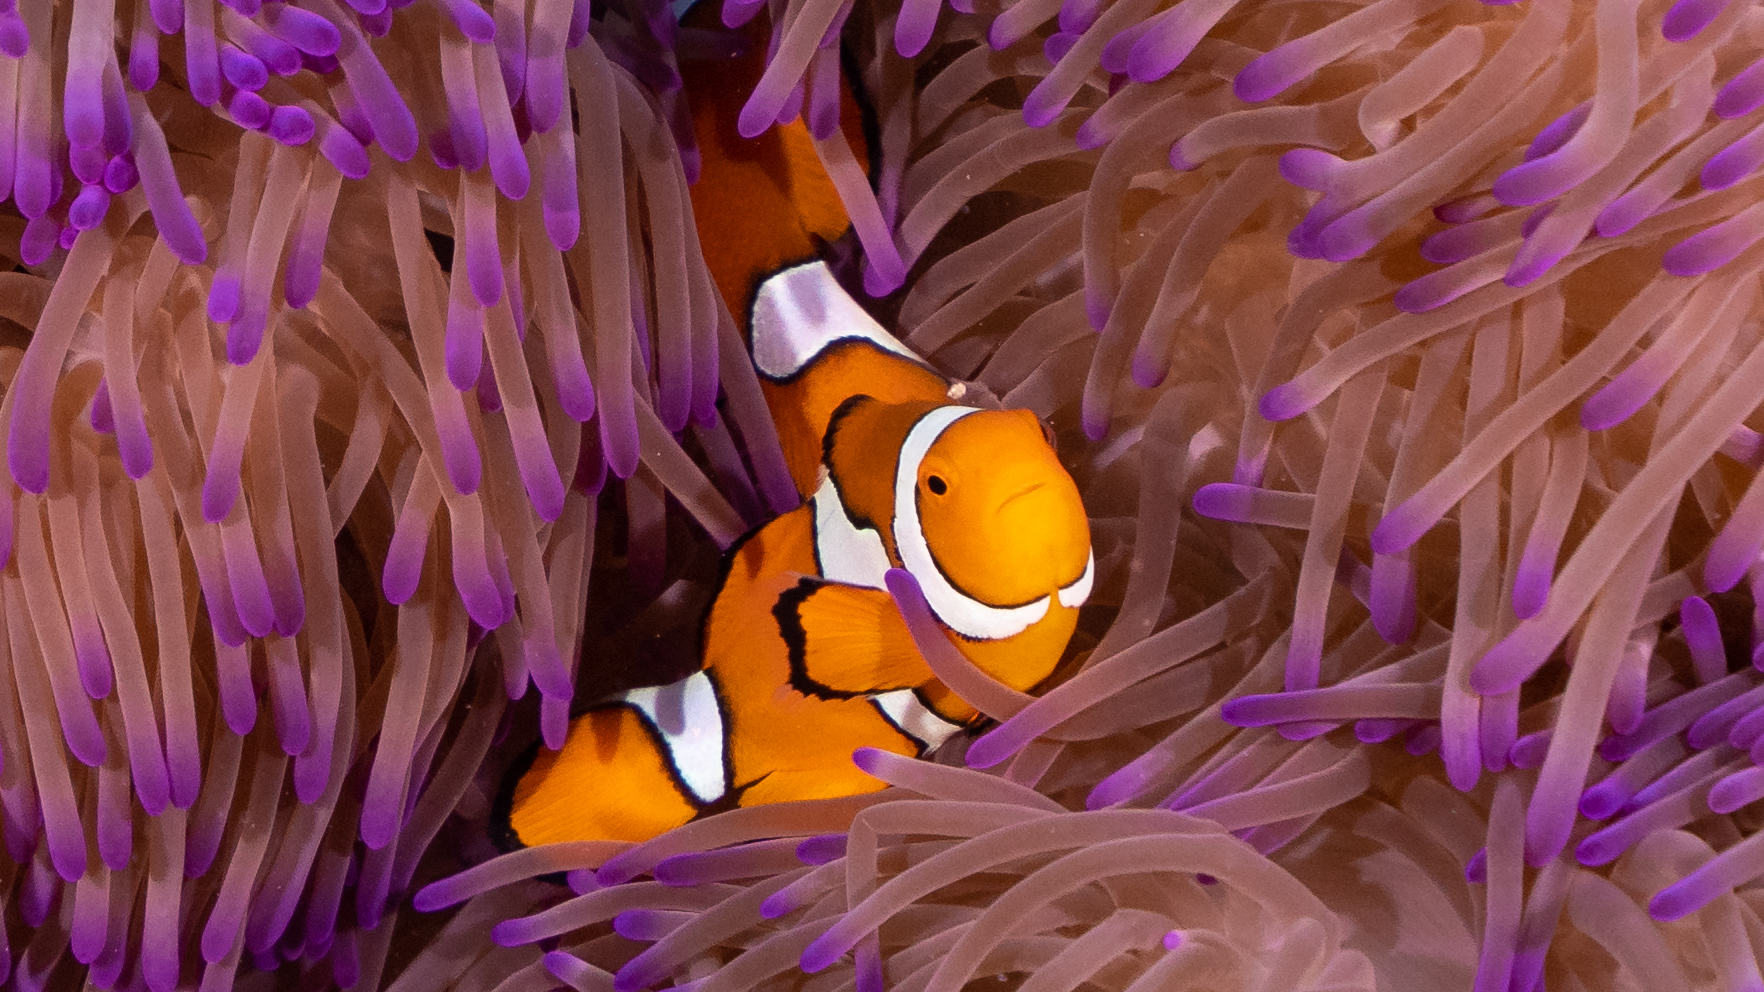 Two bright orange clownfish hiding in an anemone, one of divers' top critters to see when diving tropical coral reefs in July